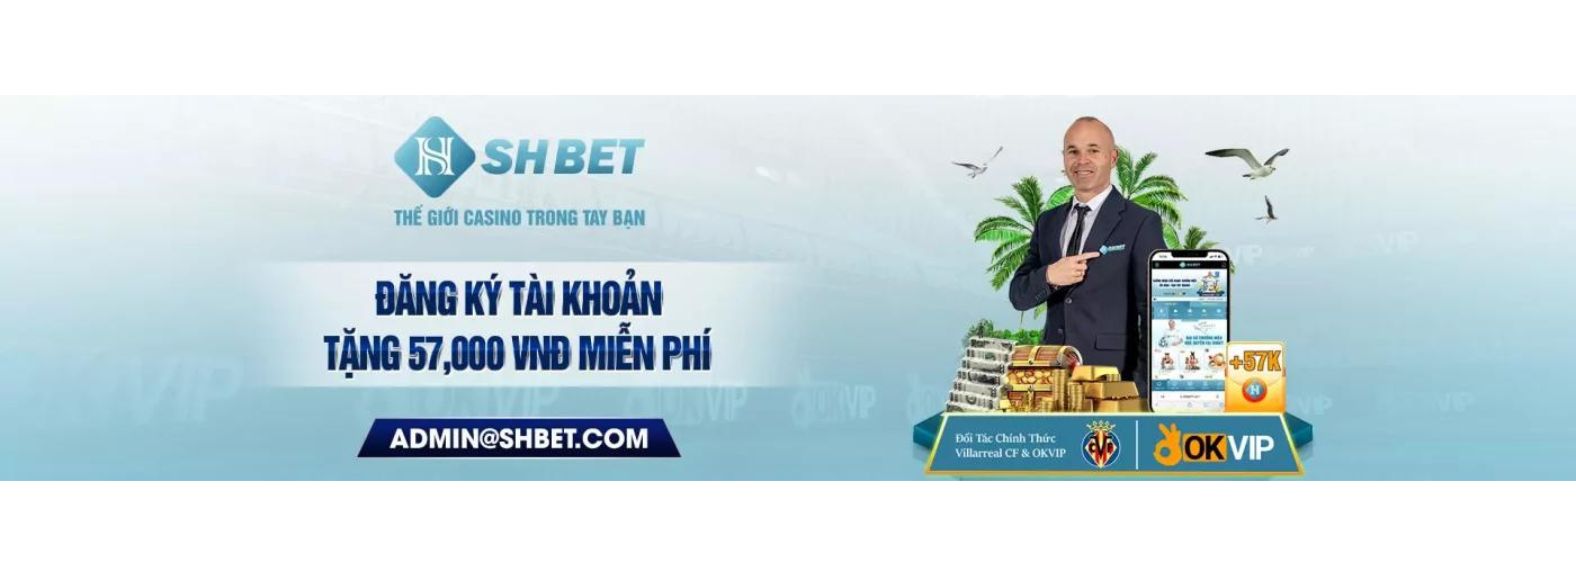 SHBET Cover Image